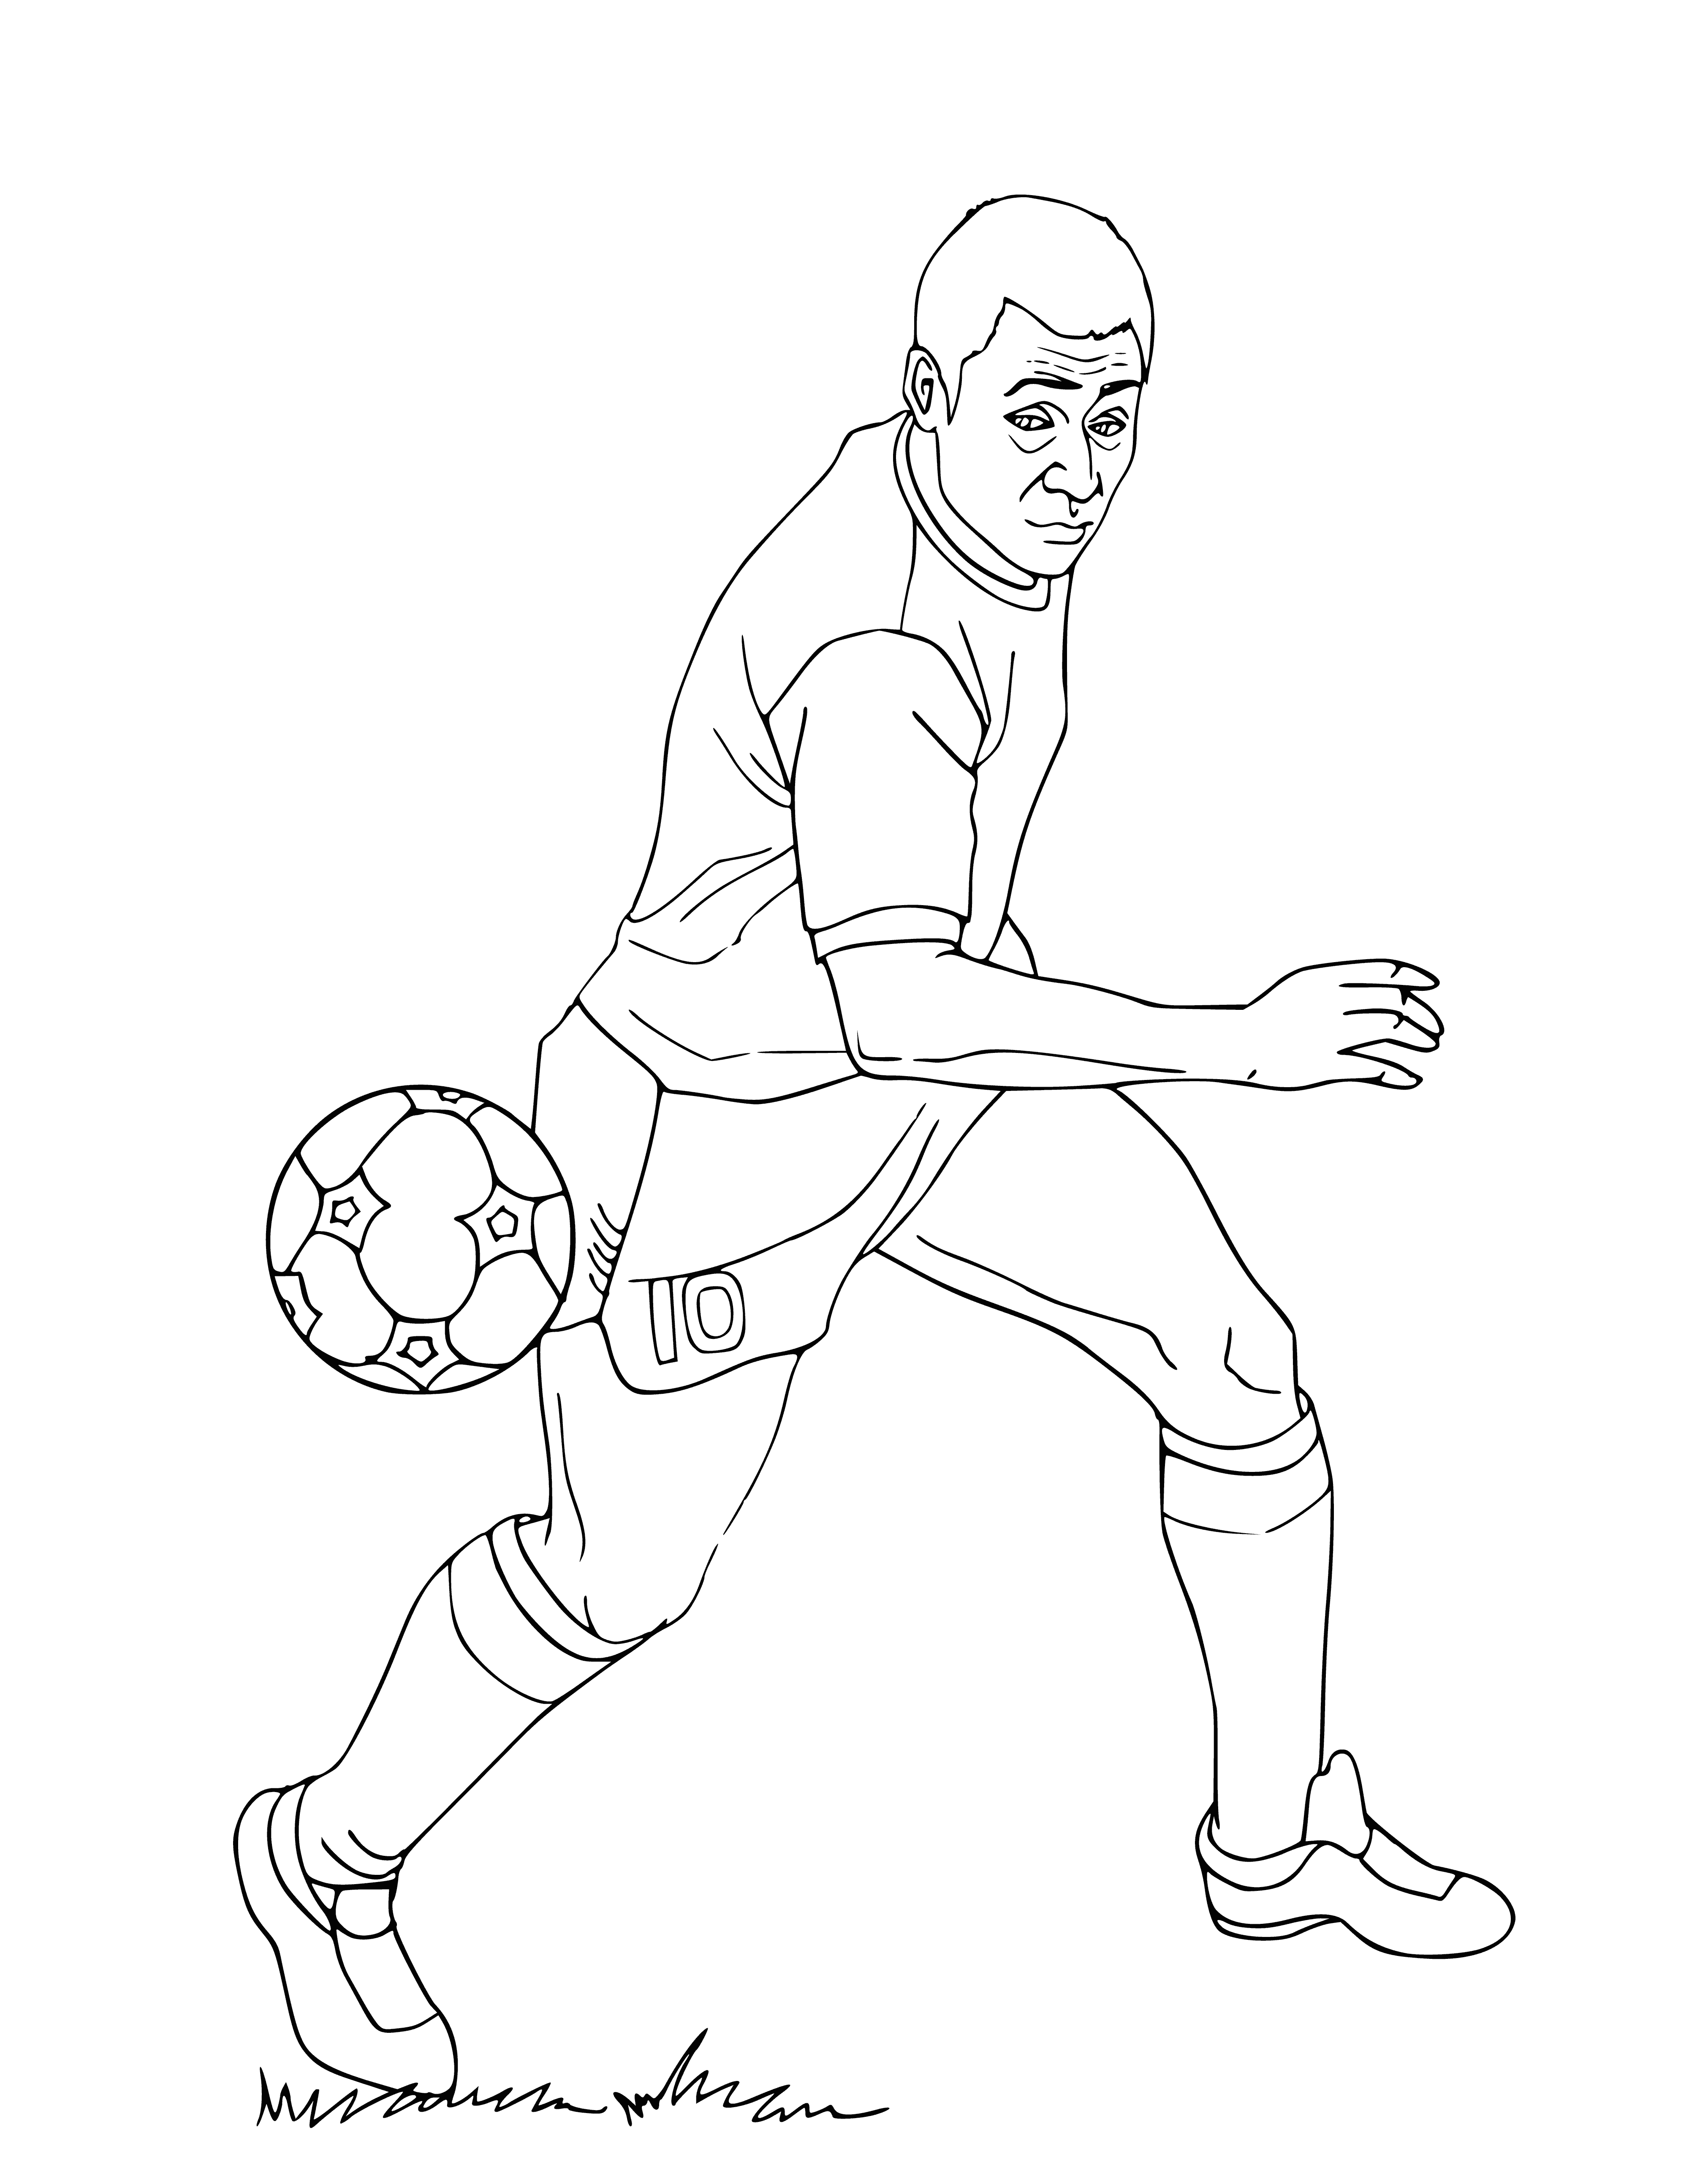 Footballer coloring page